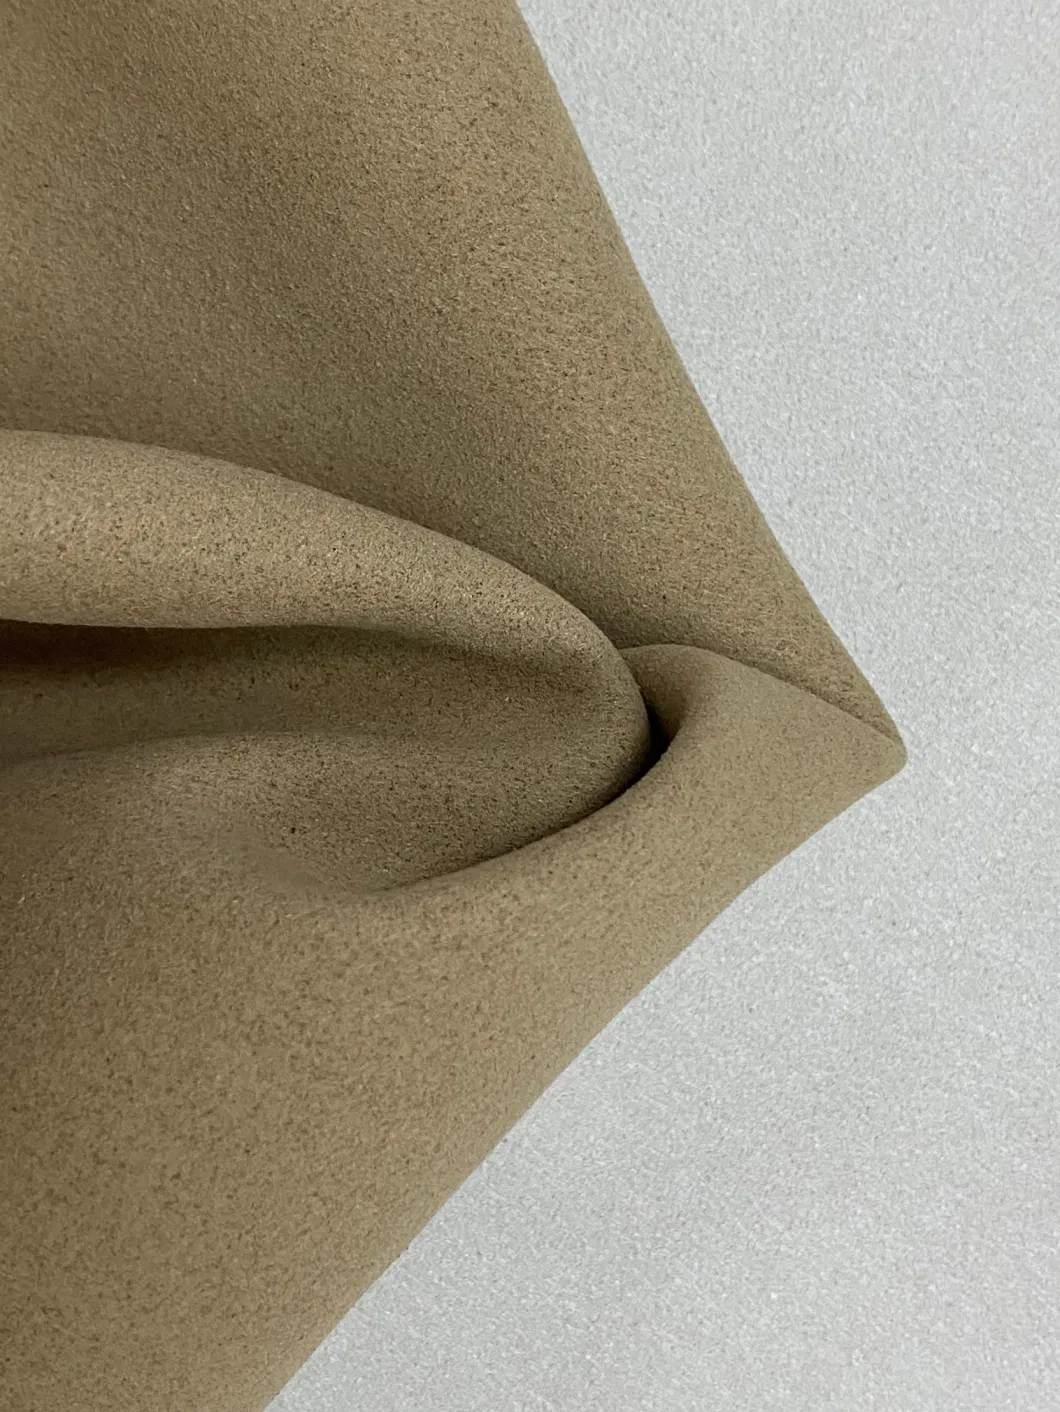 Nonwoven Fabric Super Soft Leather Goods Reinforcement Huafon High Quality Microfiber Bags